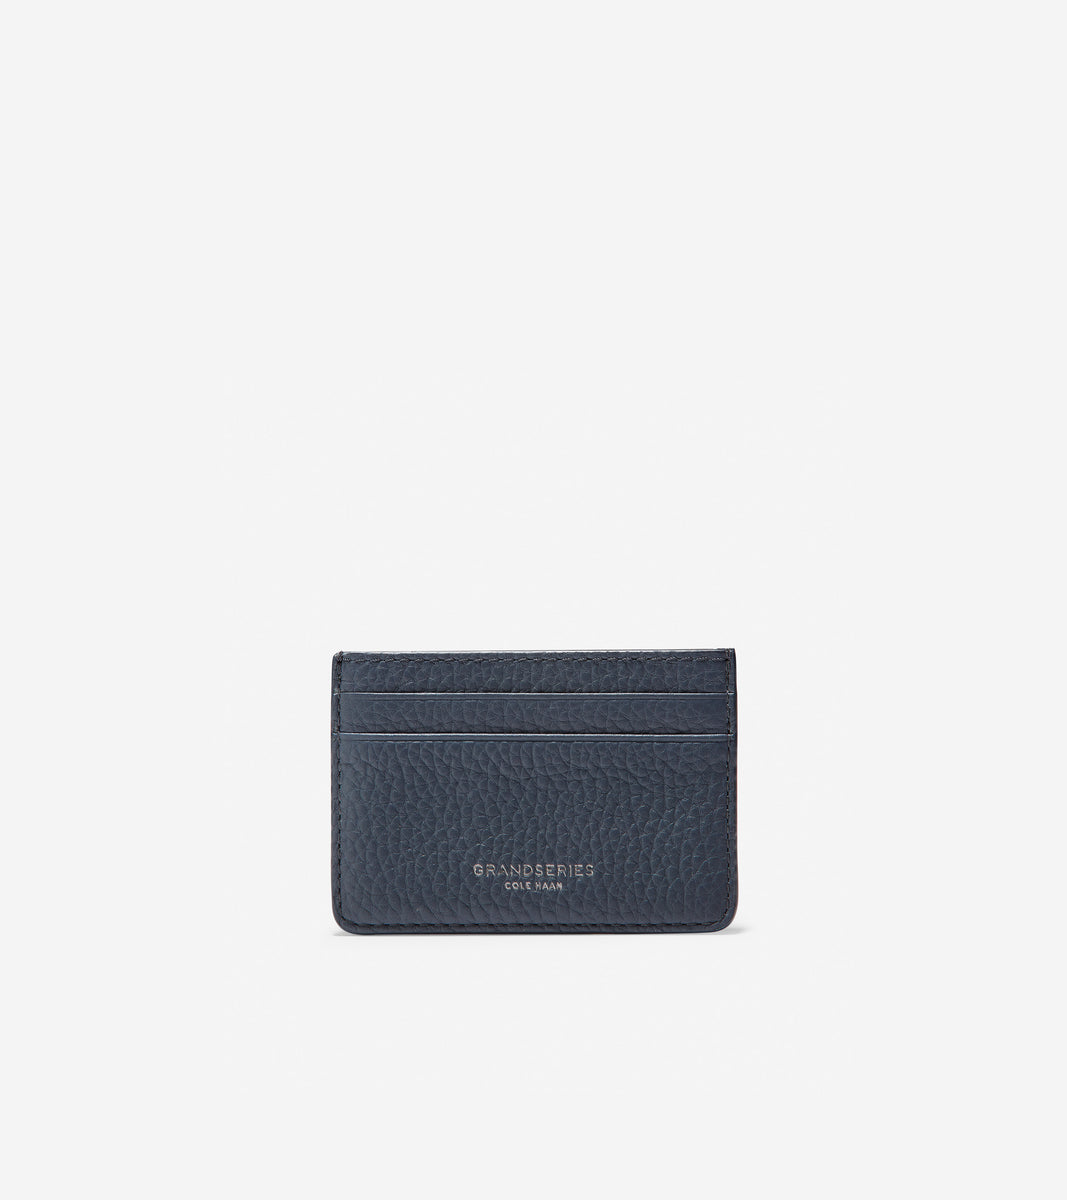 GRANDSERIES Pebbled Leather Card Case